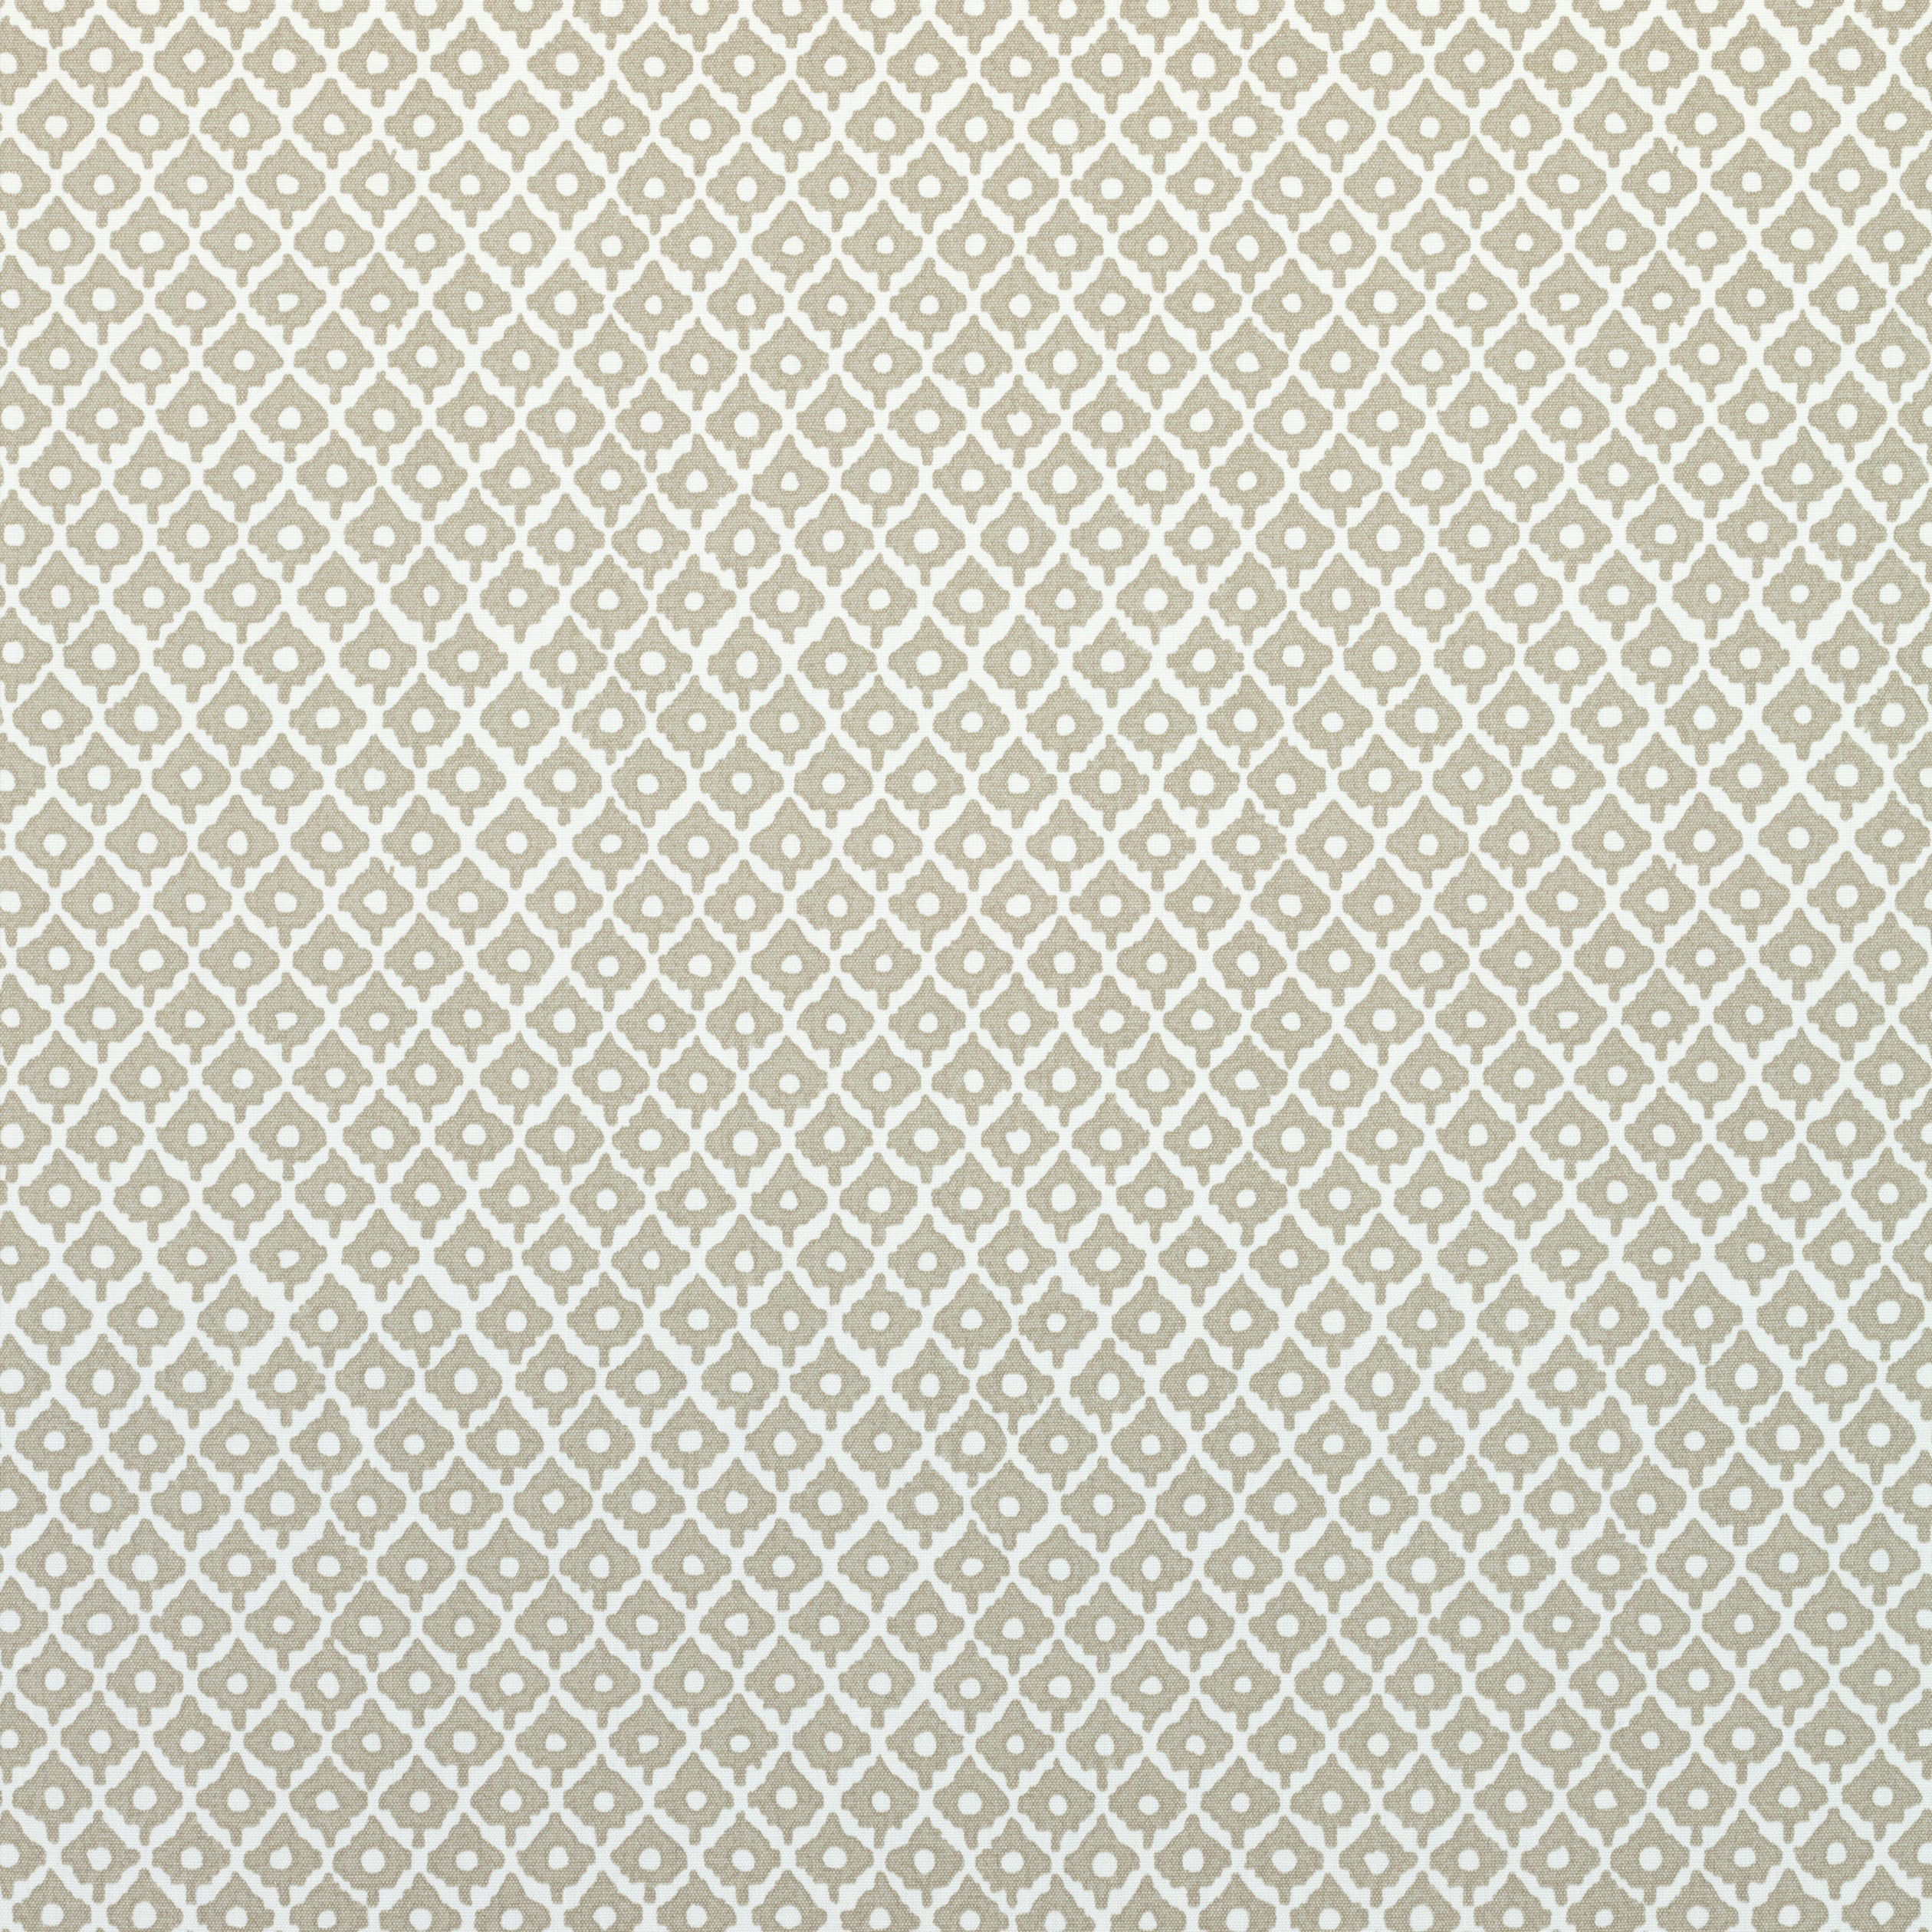 Petit Arbre fabric in flax on white  color - pattern number AF9633 - by Anna French in the Savoy collection